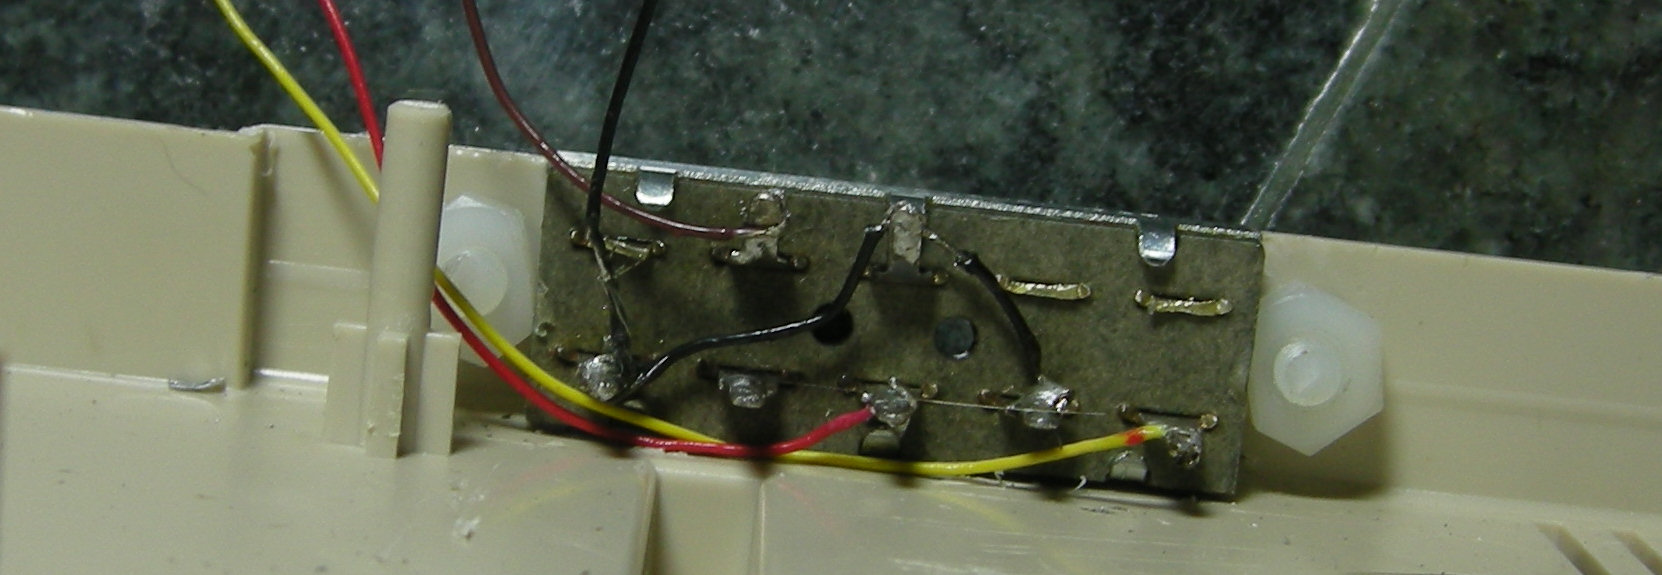 Inside view, showing switch lugs and wiring